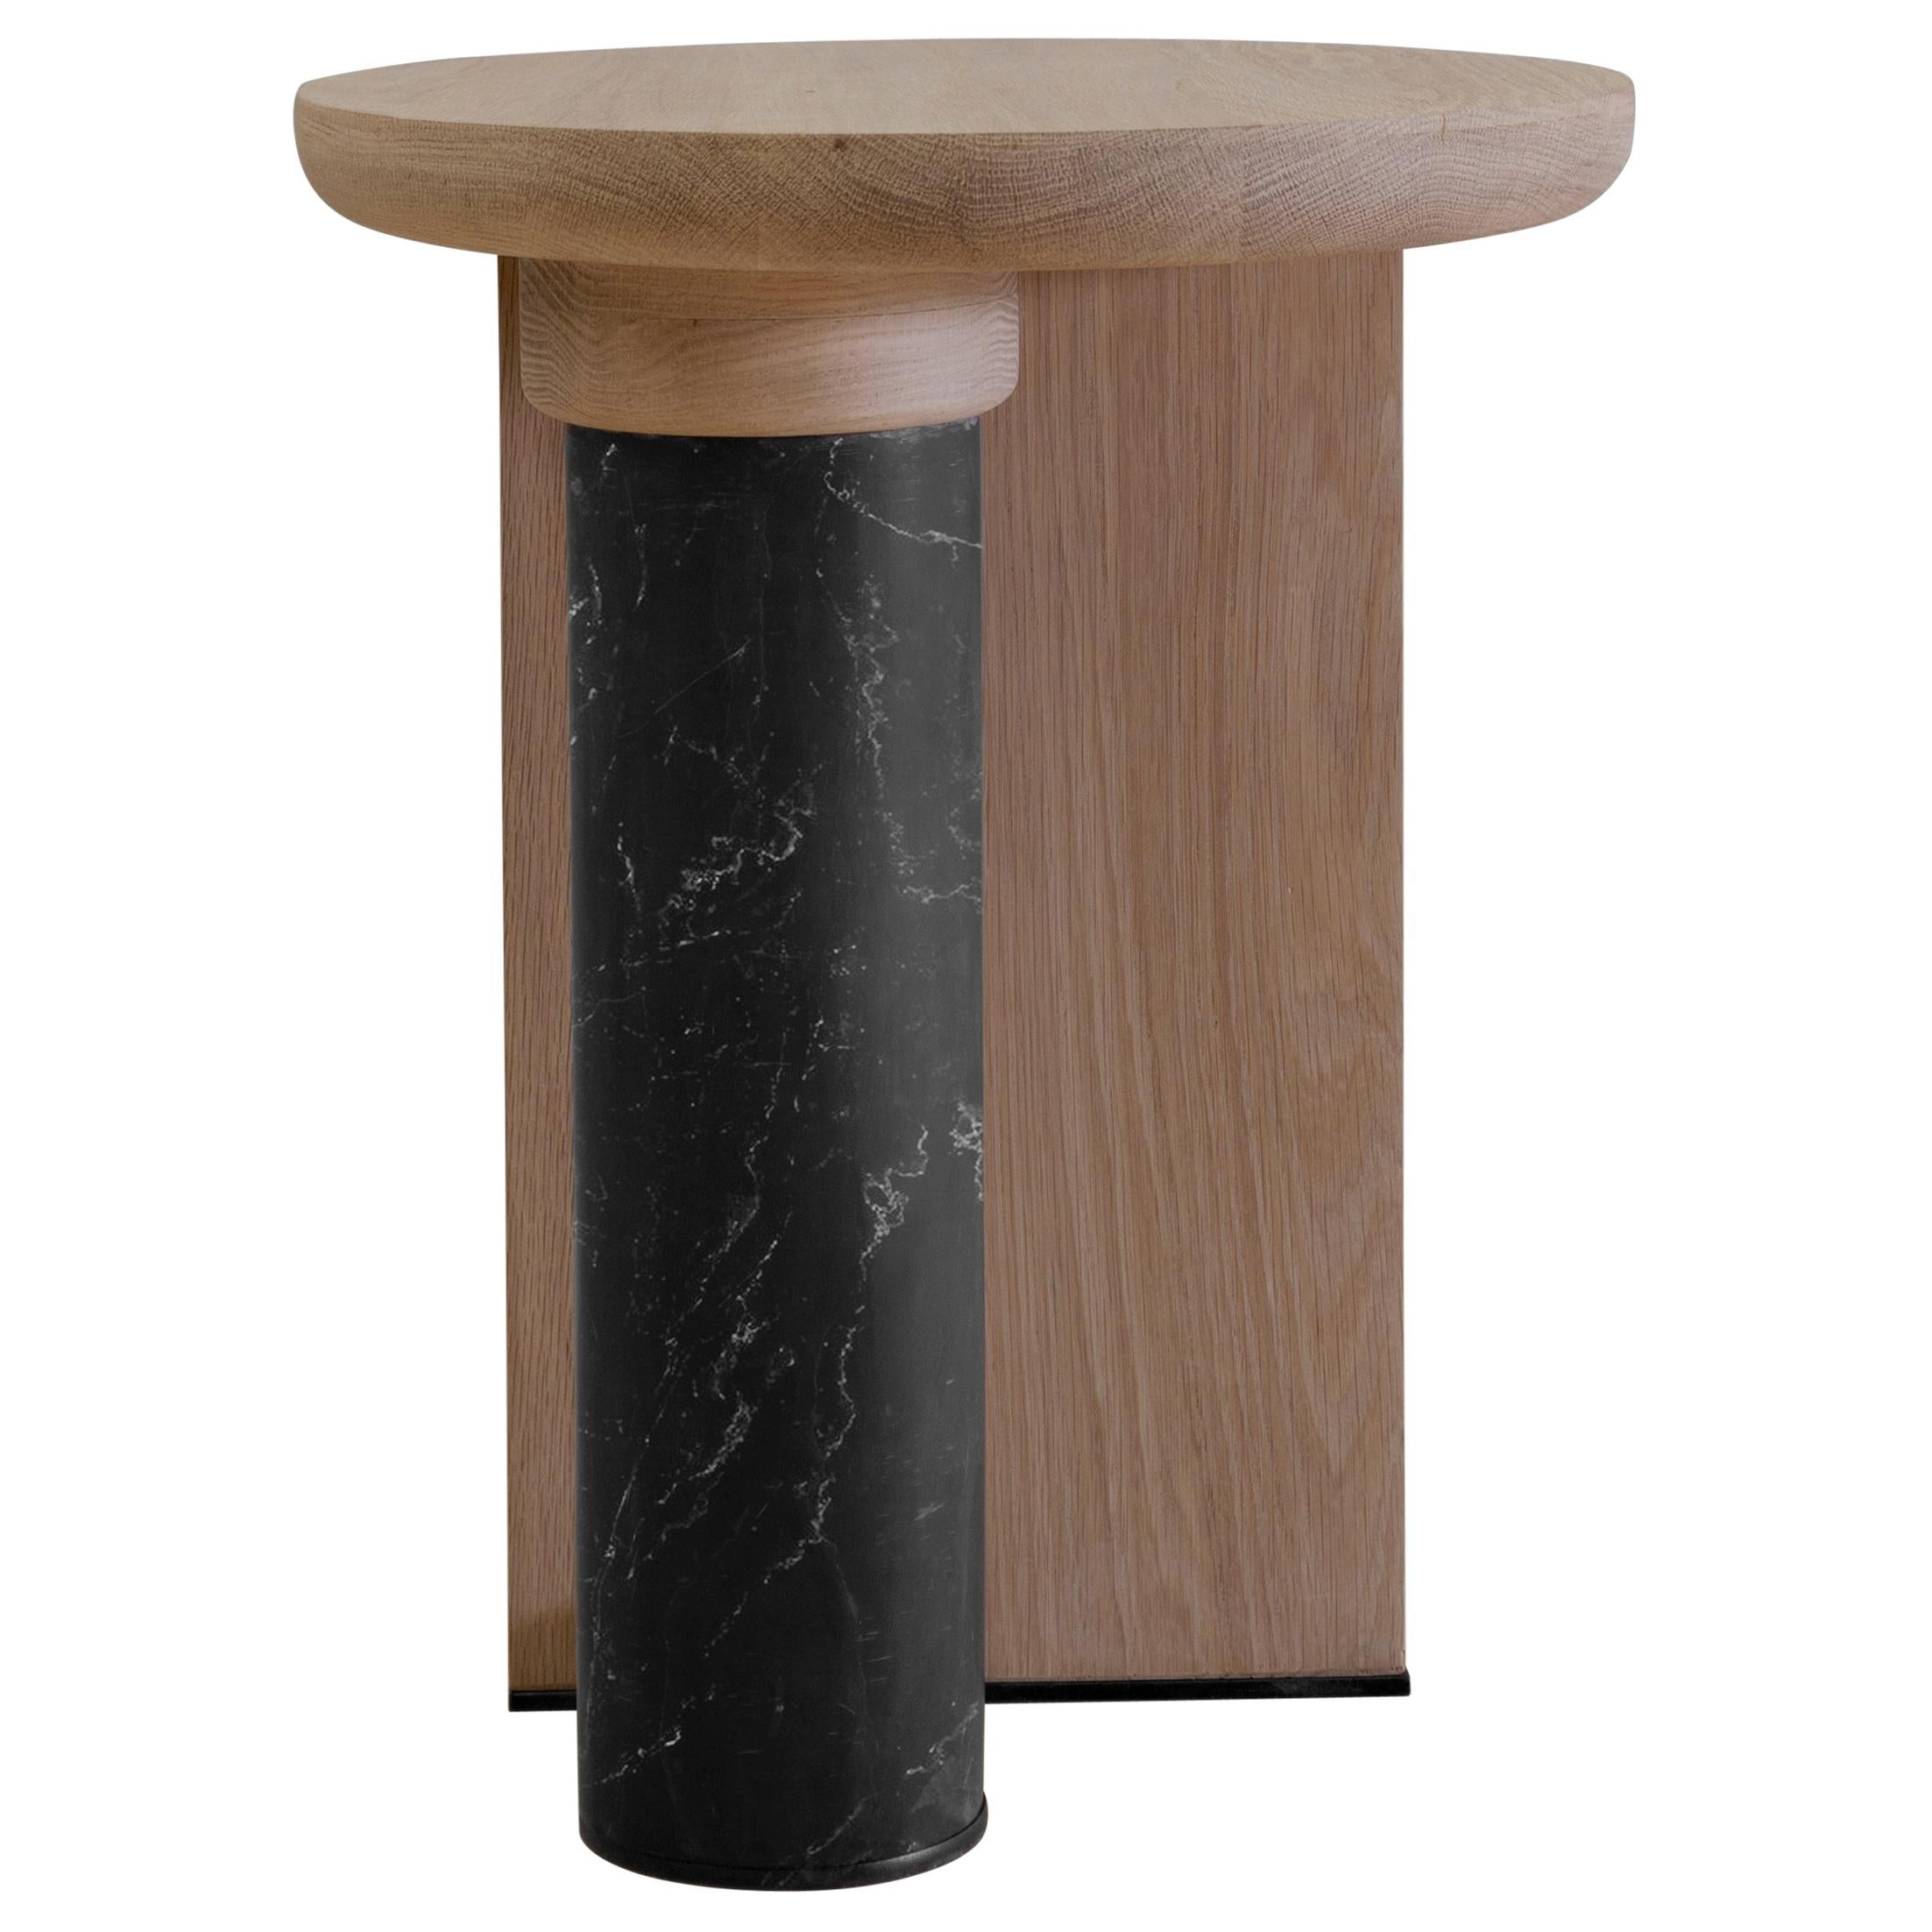 Antropología 06, Sculptural Stool, Side Table Made of Solid Oak Wood and Marble